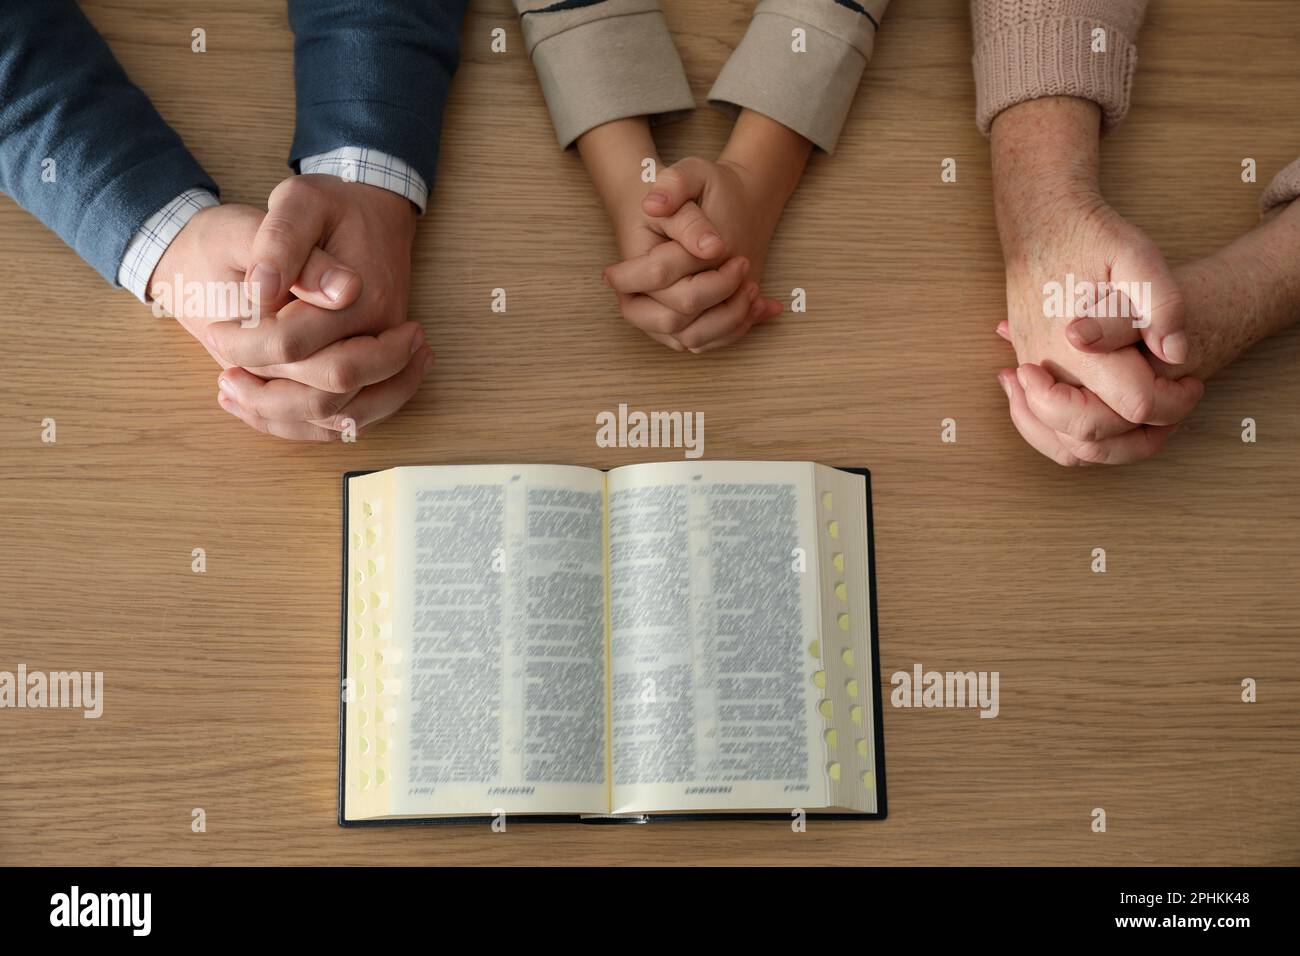 Boy and his godparents praying together at wooden table, top view Stock Photo